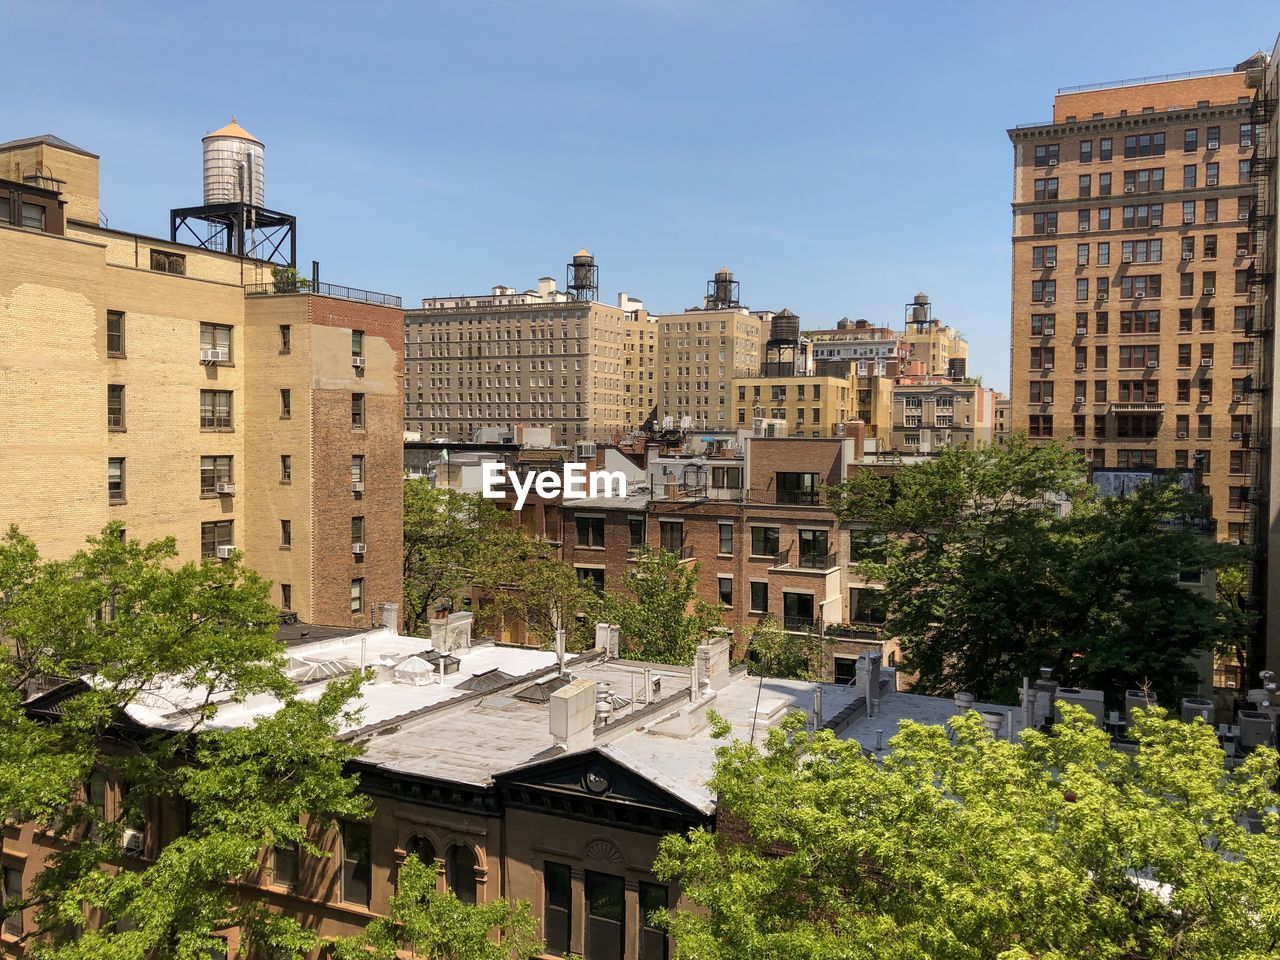 View of upper west side skyline with classic brownstones and wooden water towers.